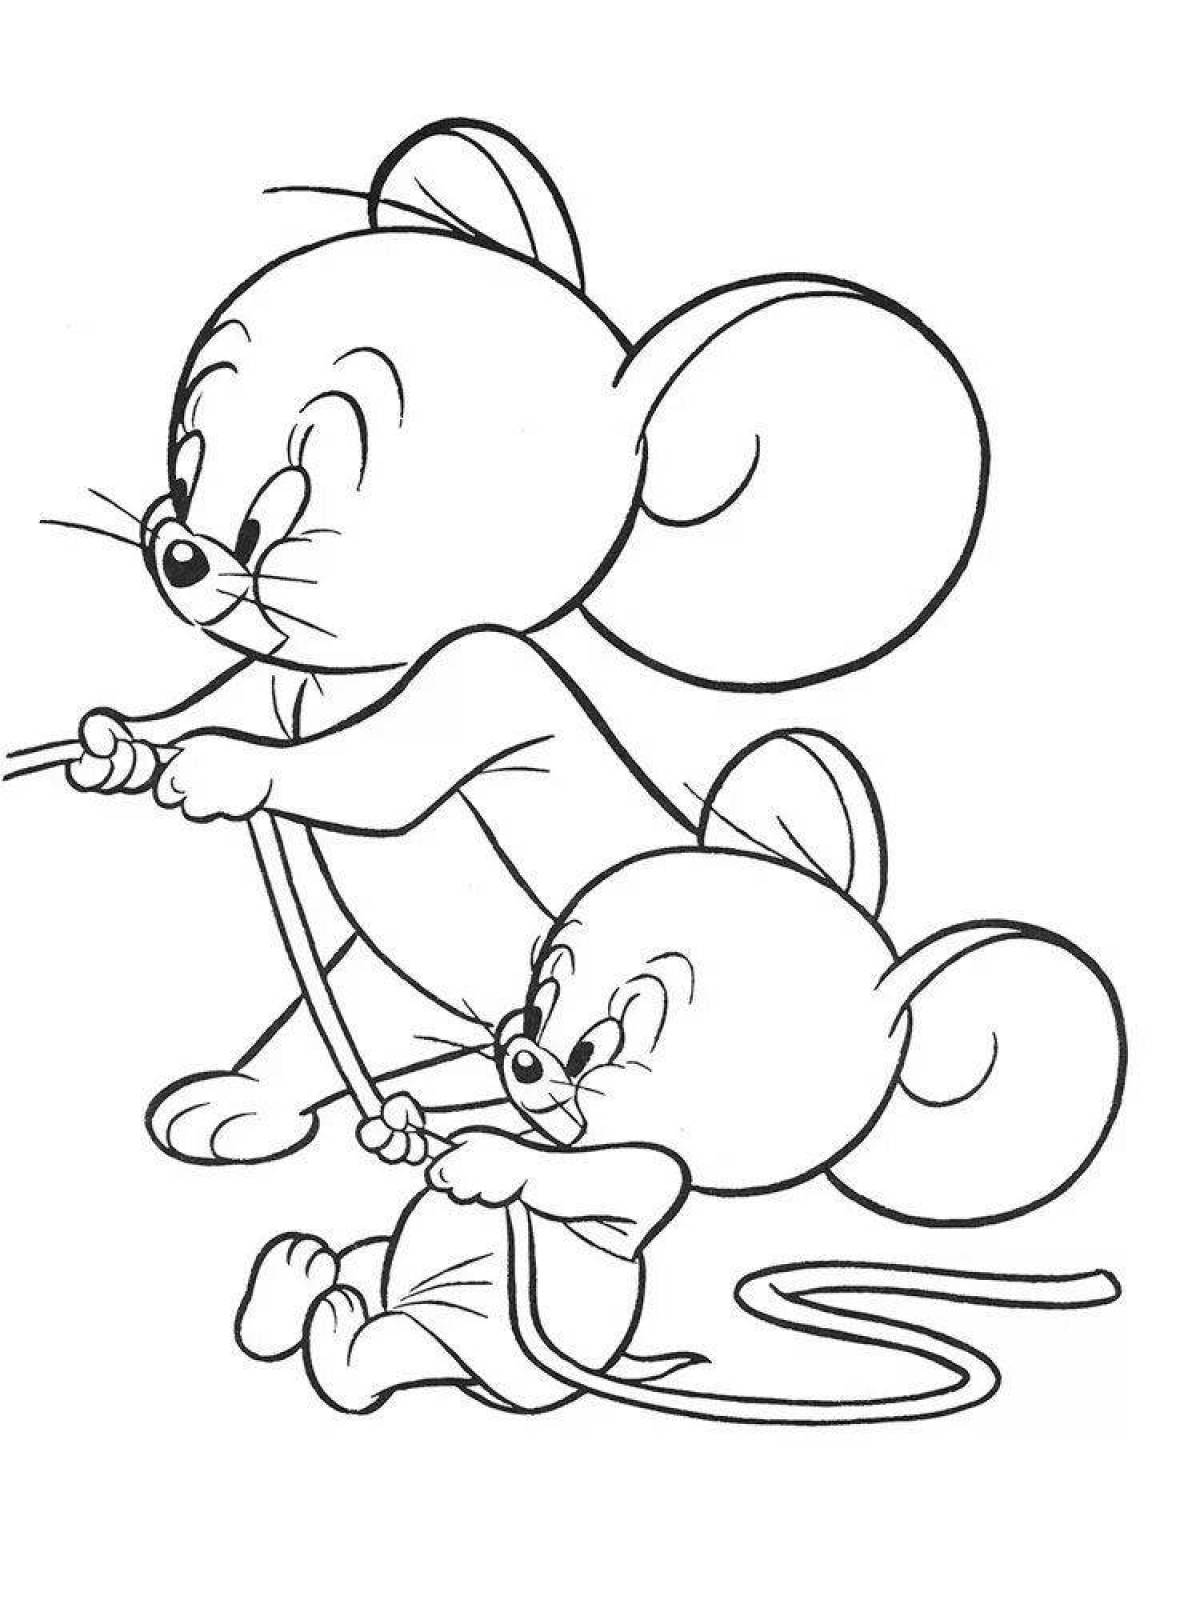 Bright coloring page 5 6